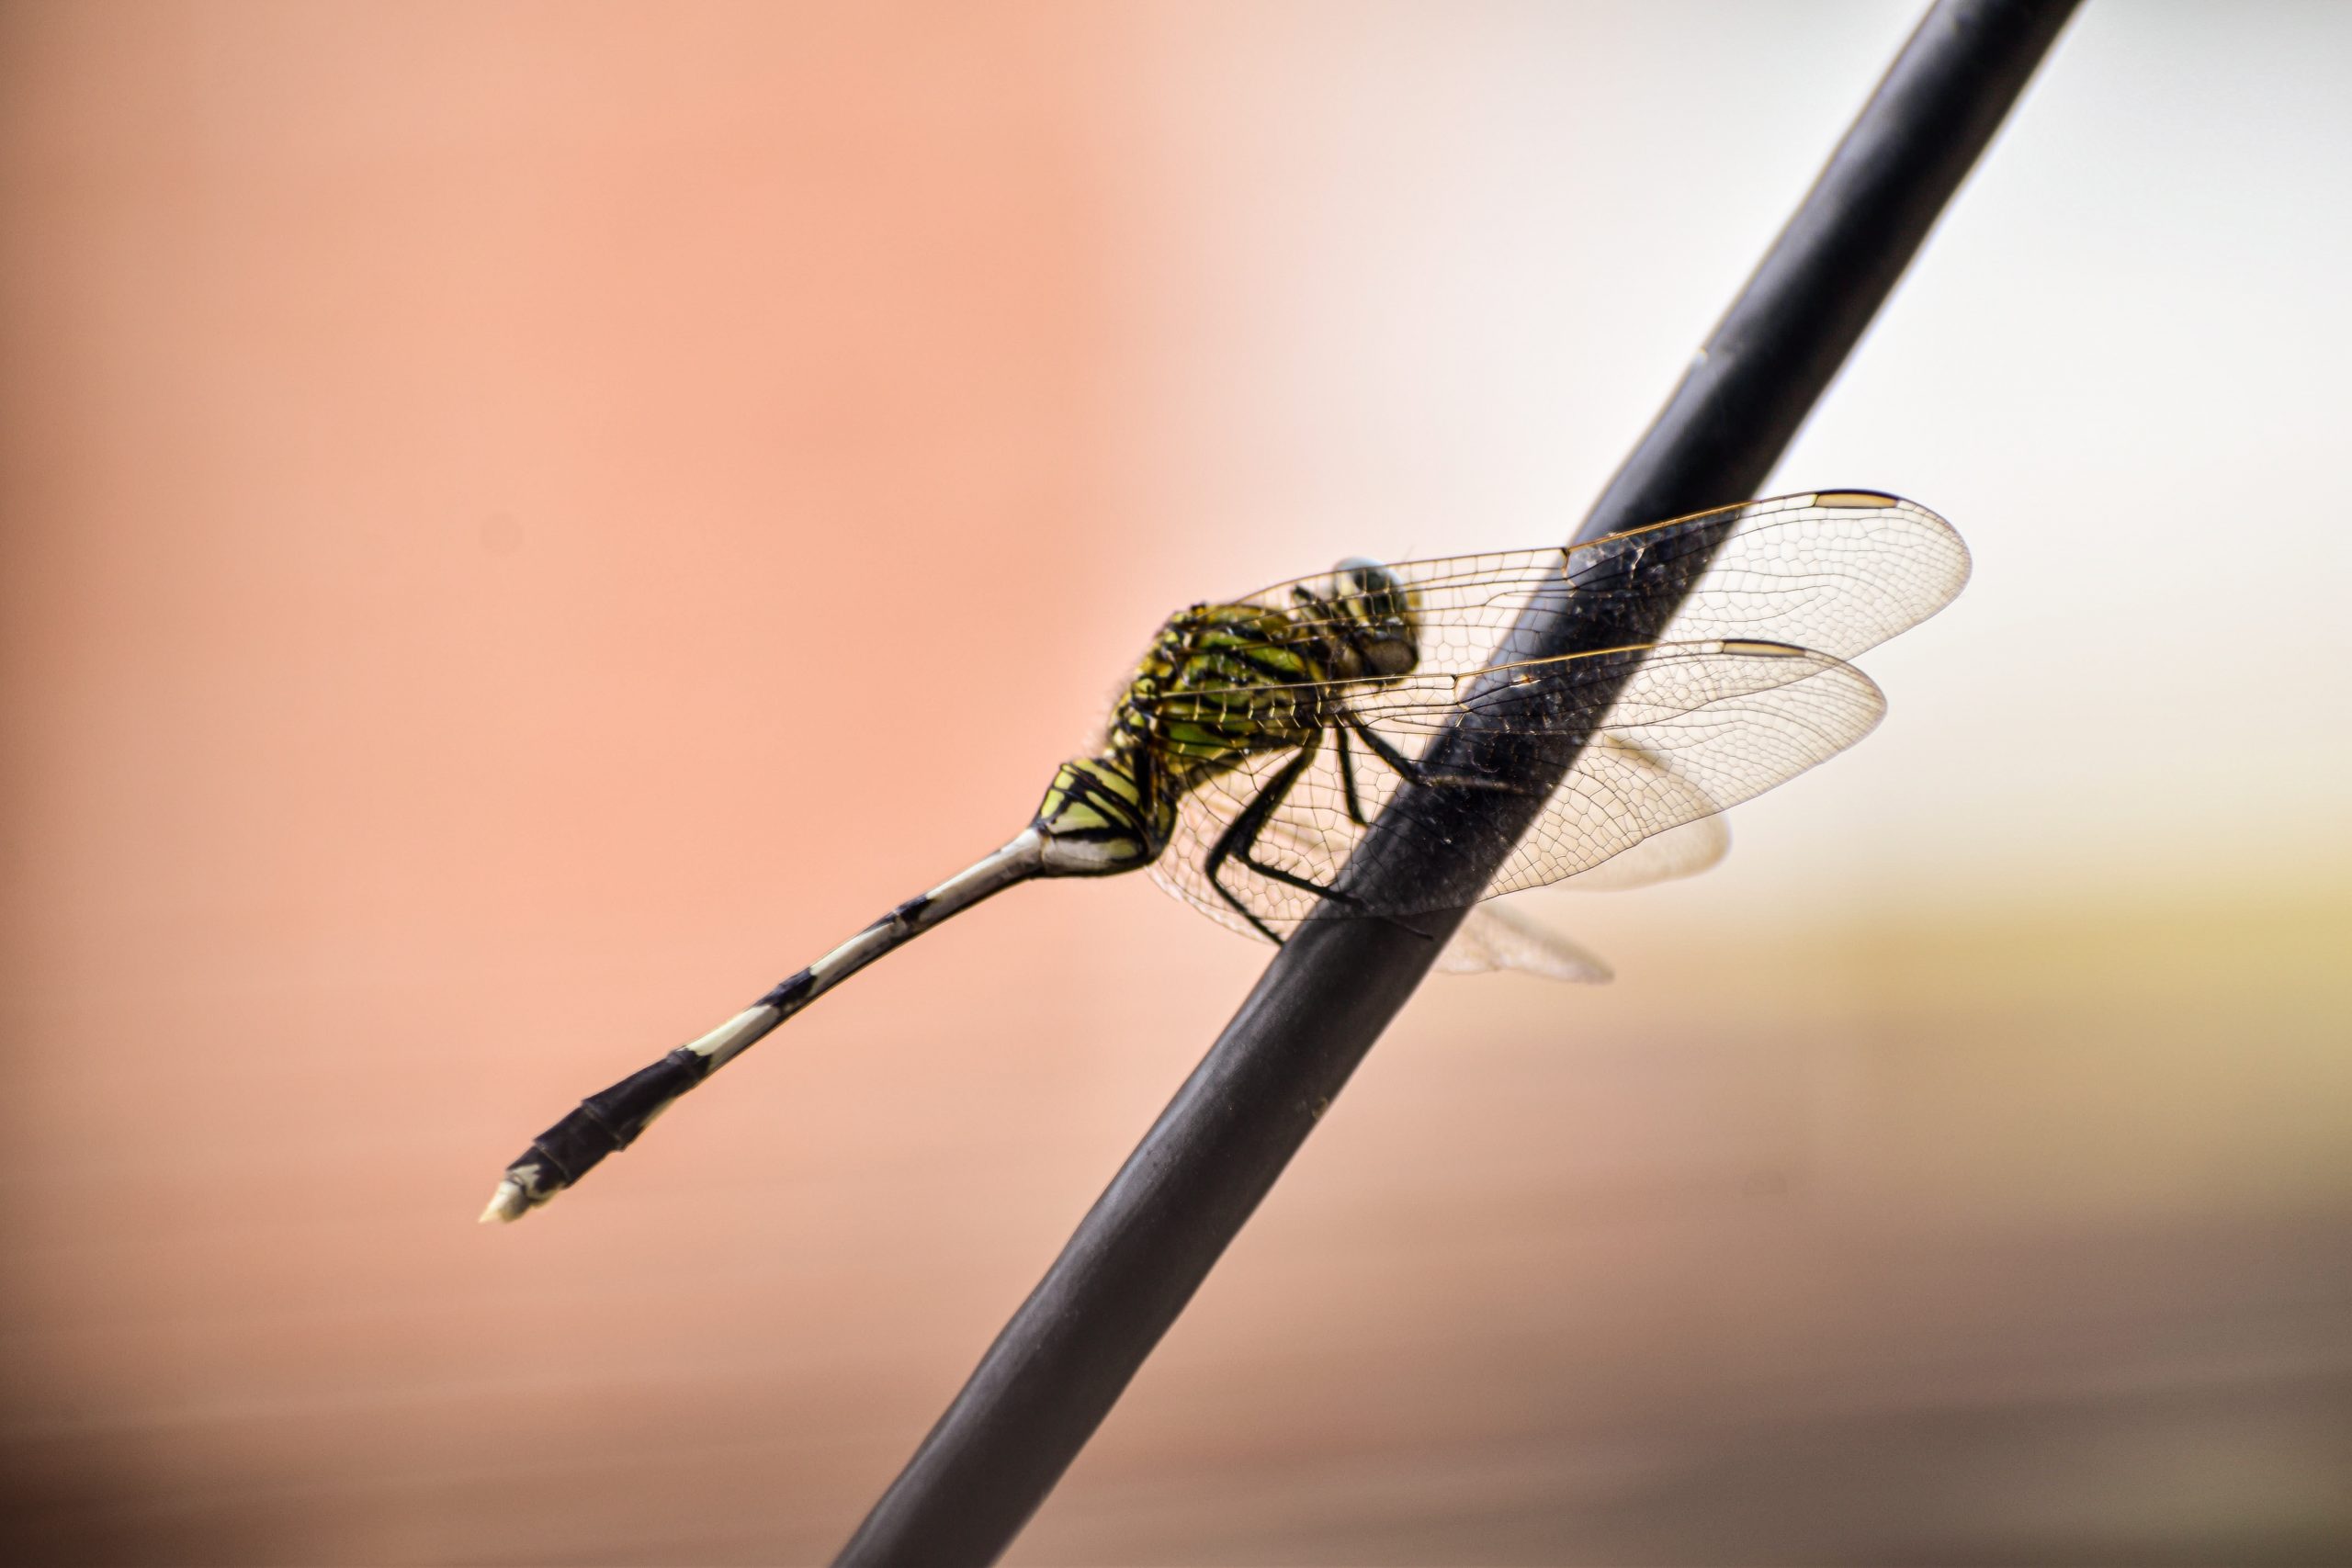 A dragonfly on a wire